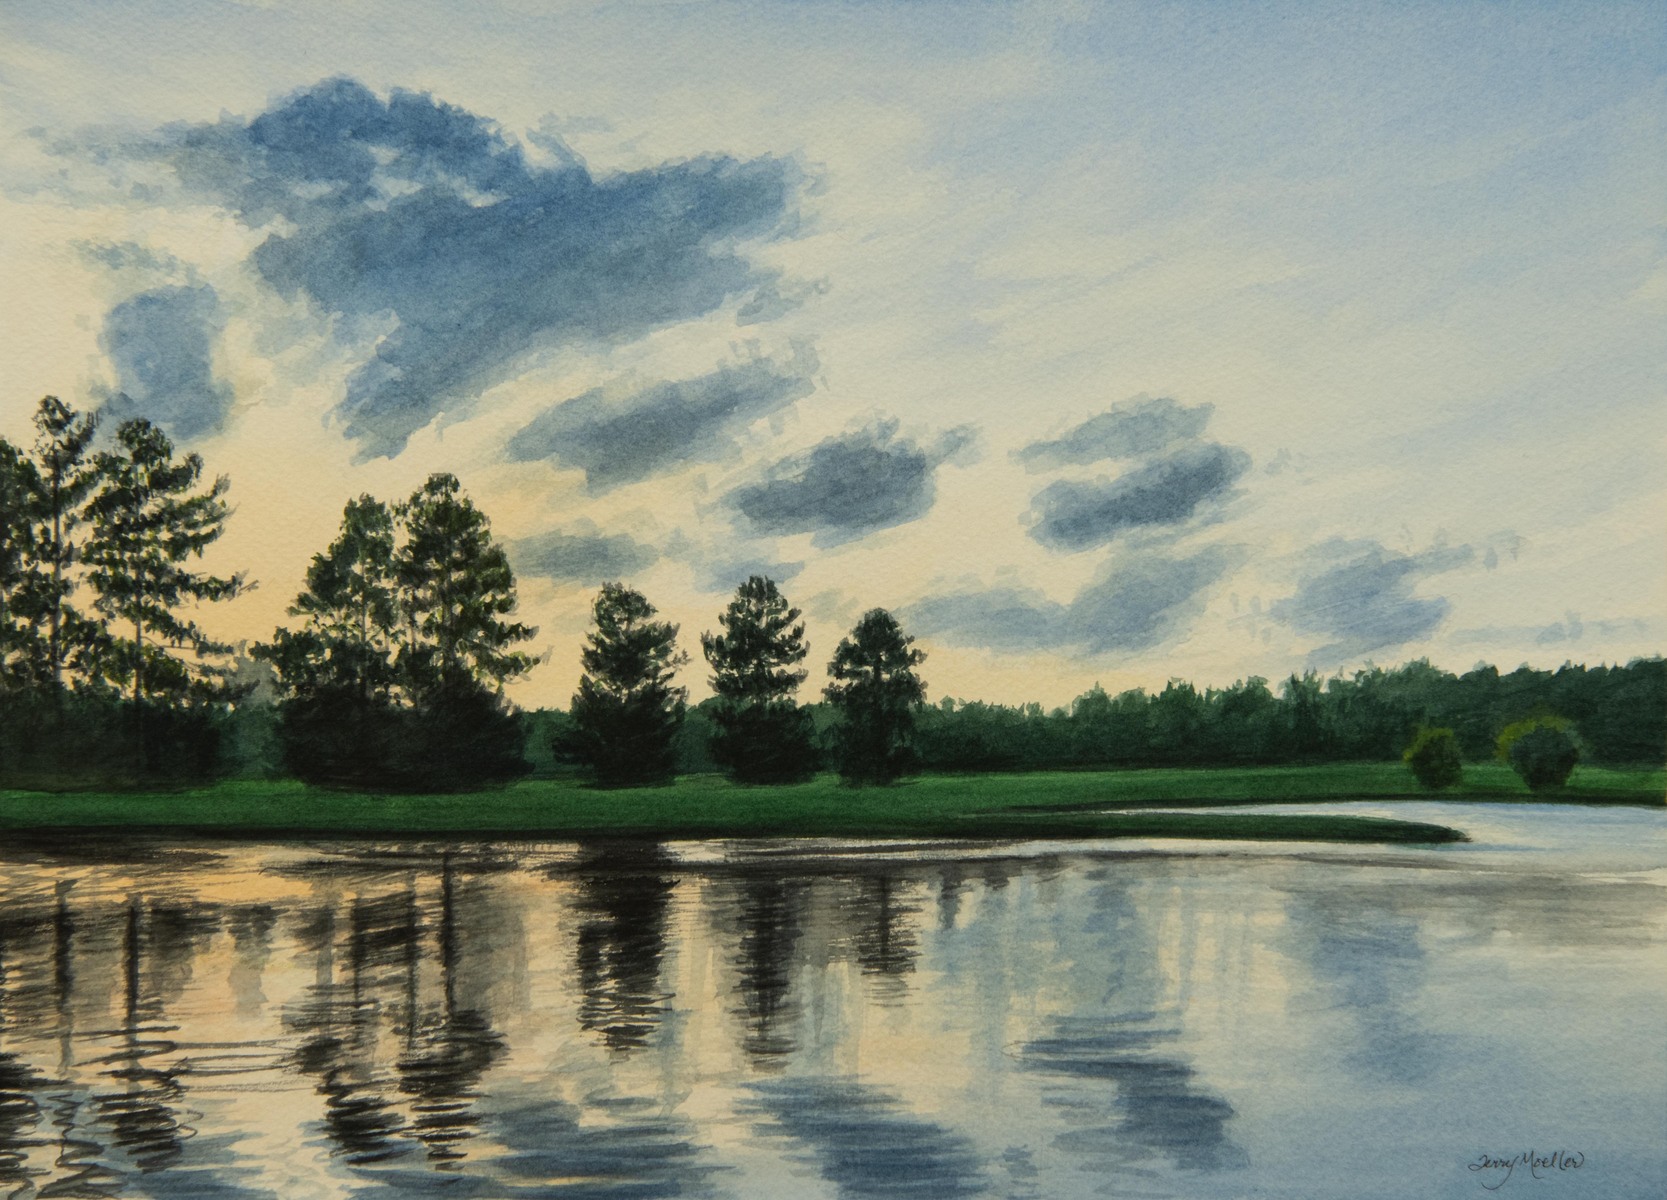 "A Georgia Evening at the Pond"  10.5" X 14"  watercolor on 300 lb. watercolor paper